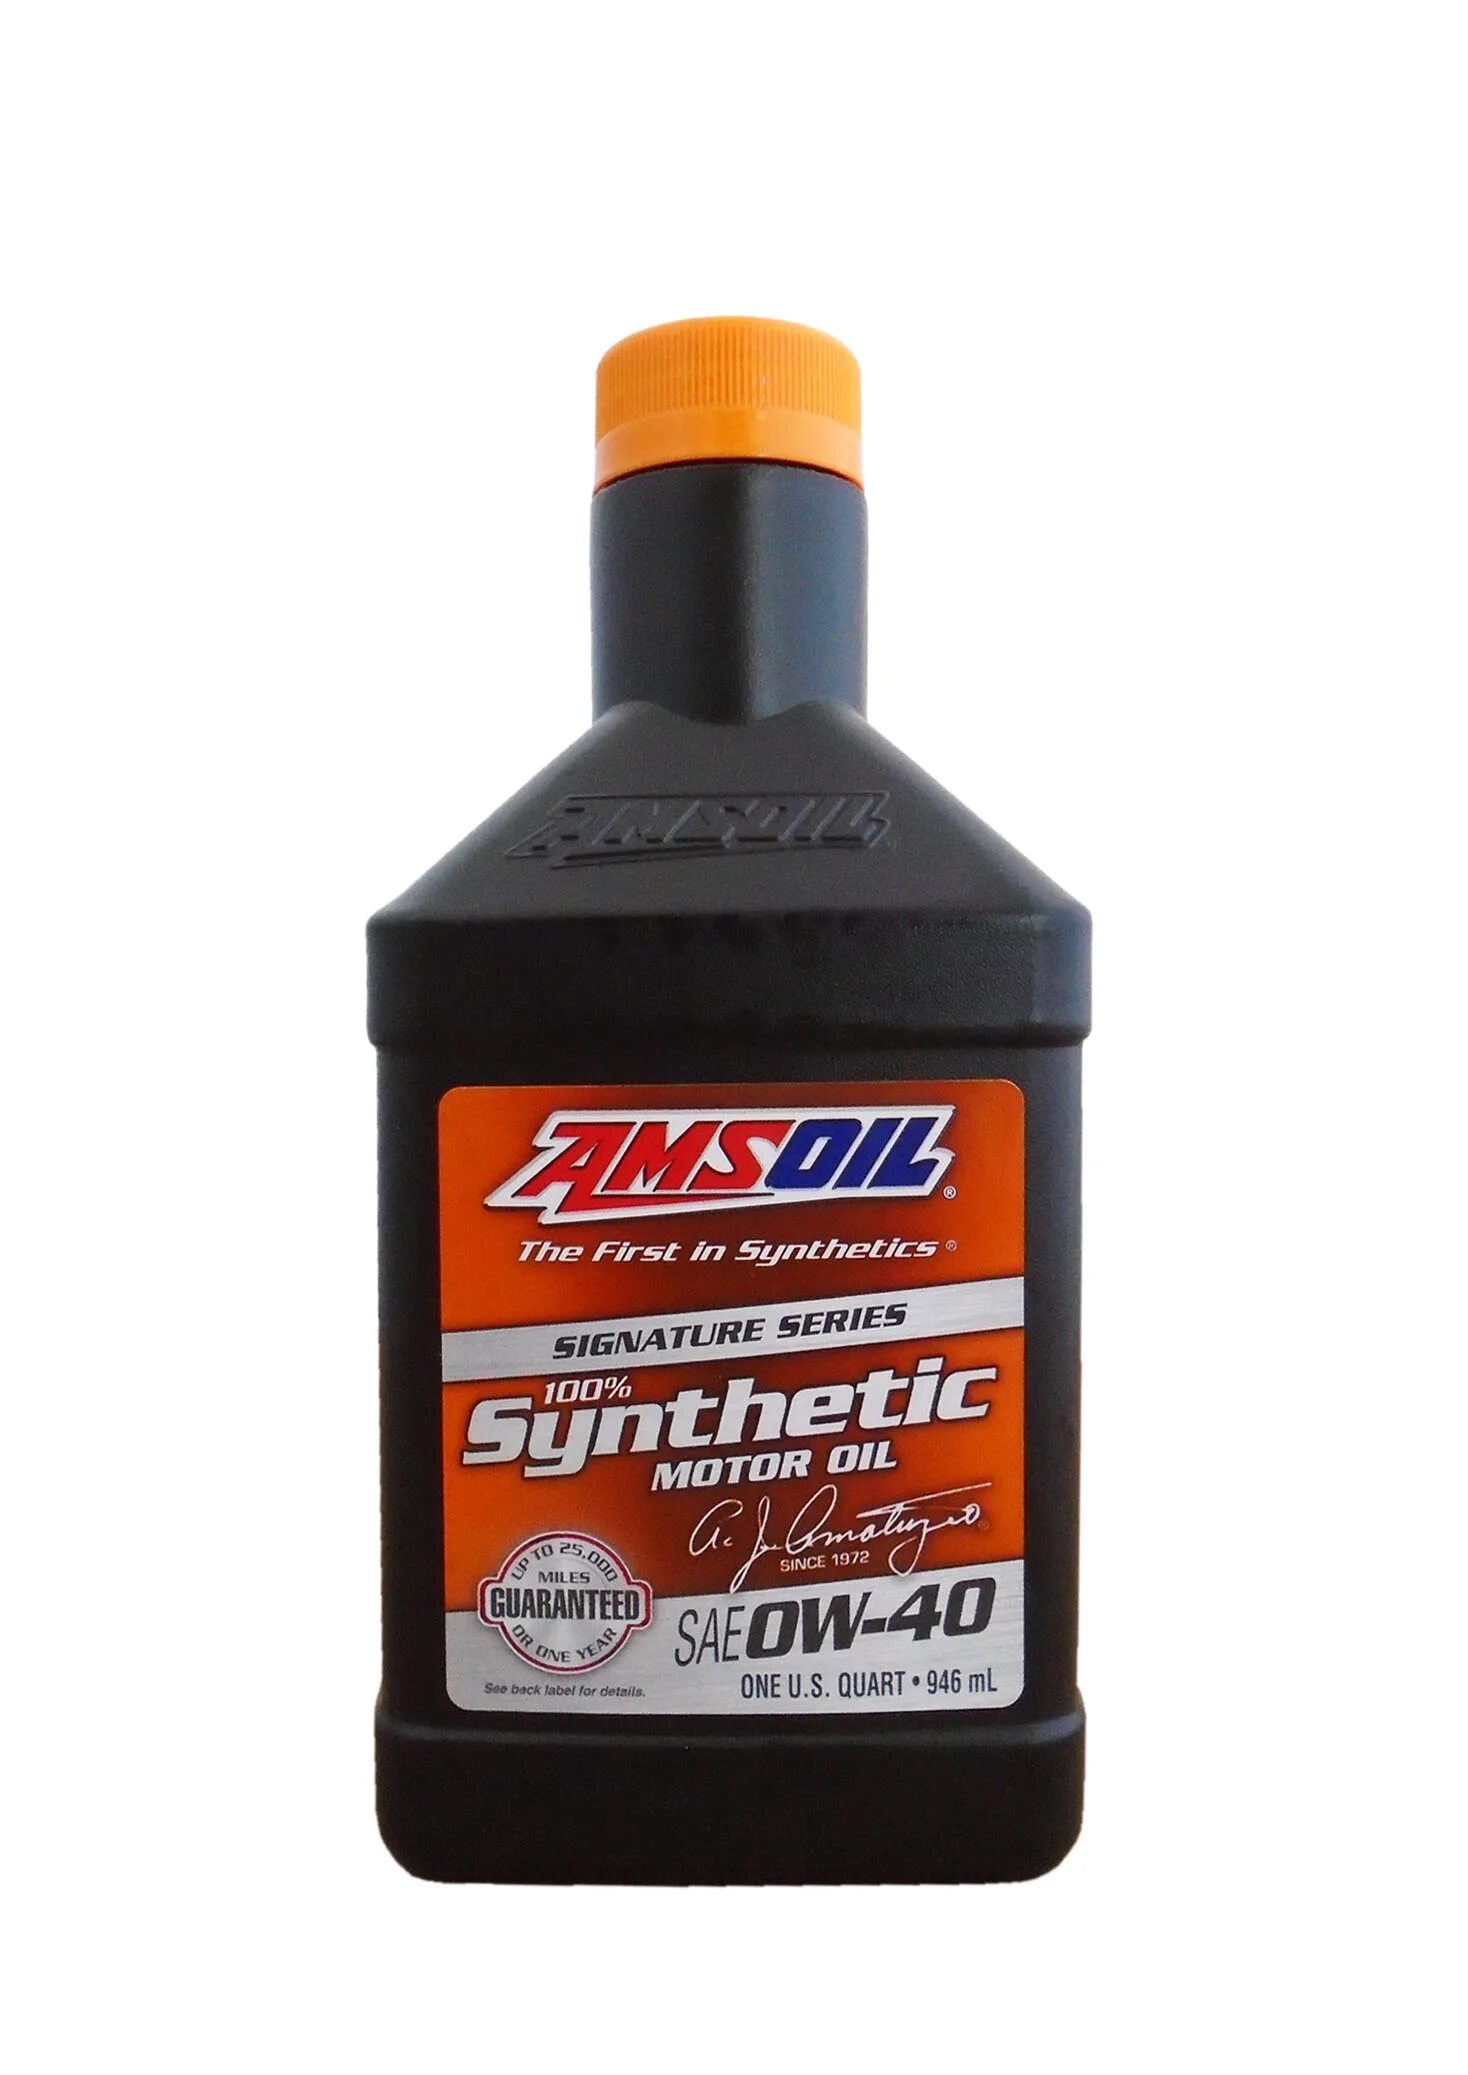 Моторное масло AMSOIL Signature Series Synthetic Motor Oil 5w-50 0.946 л. Моторное масло AMSOIL extreme Power SAE 0w-40 100% Synthetic Motor Oil (0,946л). AMSOIL 20w40 синтетическая. AMSOIL 0w40 1л.